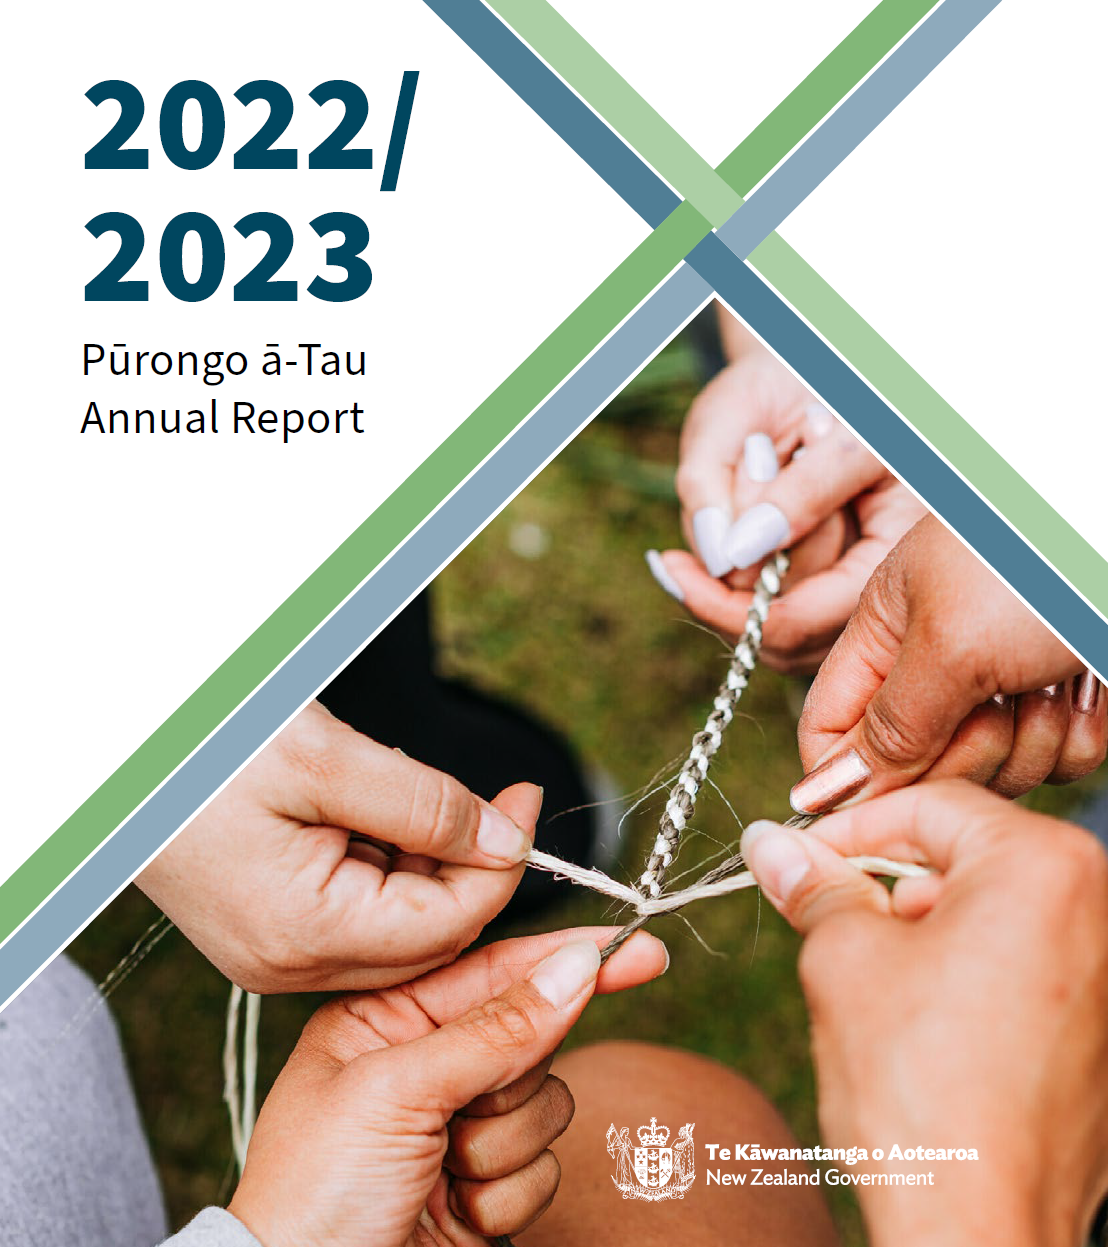 Pūrongo ā-Tau 2022/2023  Annual Report 2022/2023. Image shows many hands weaving together a single strand of plaited rope from different coloured flax threads